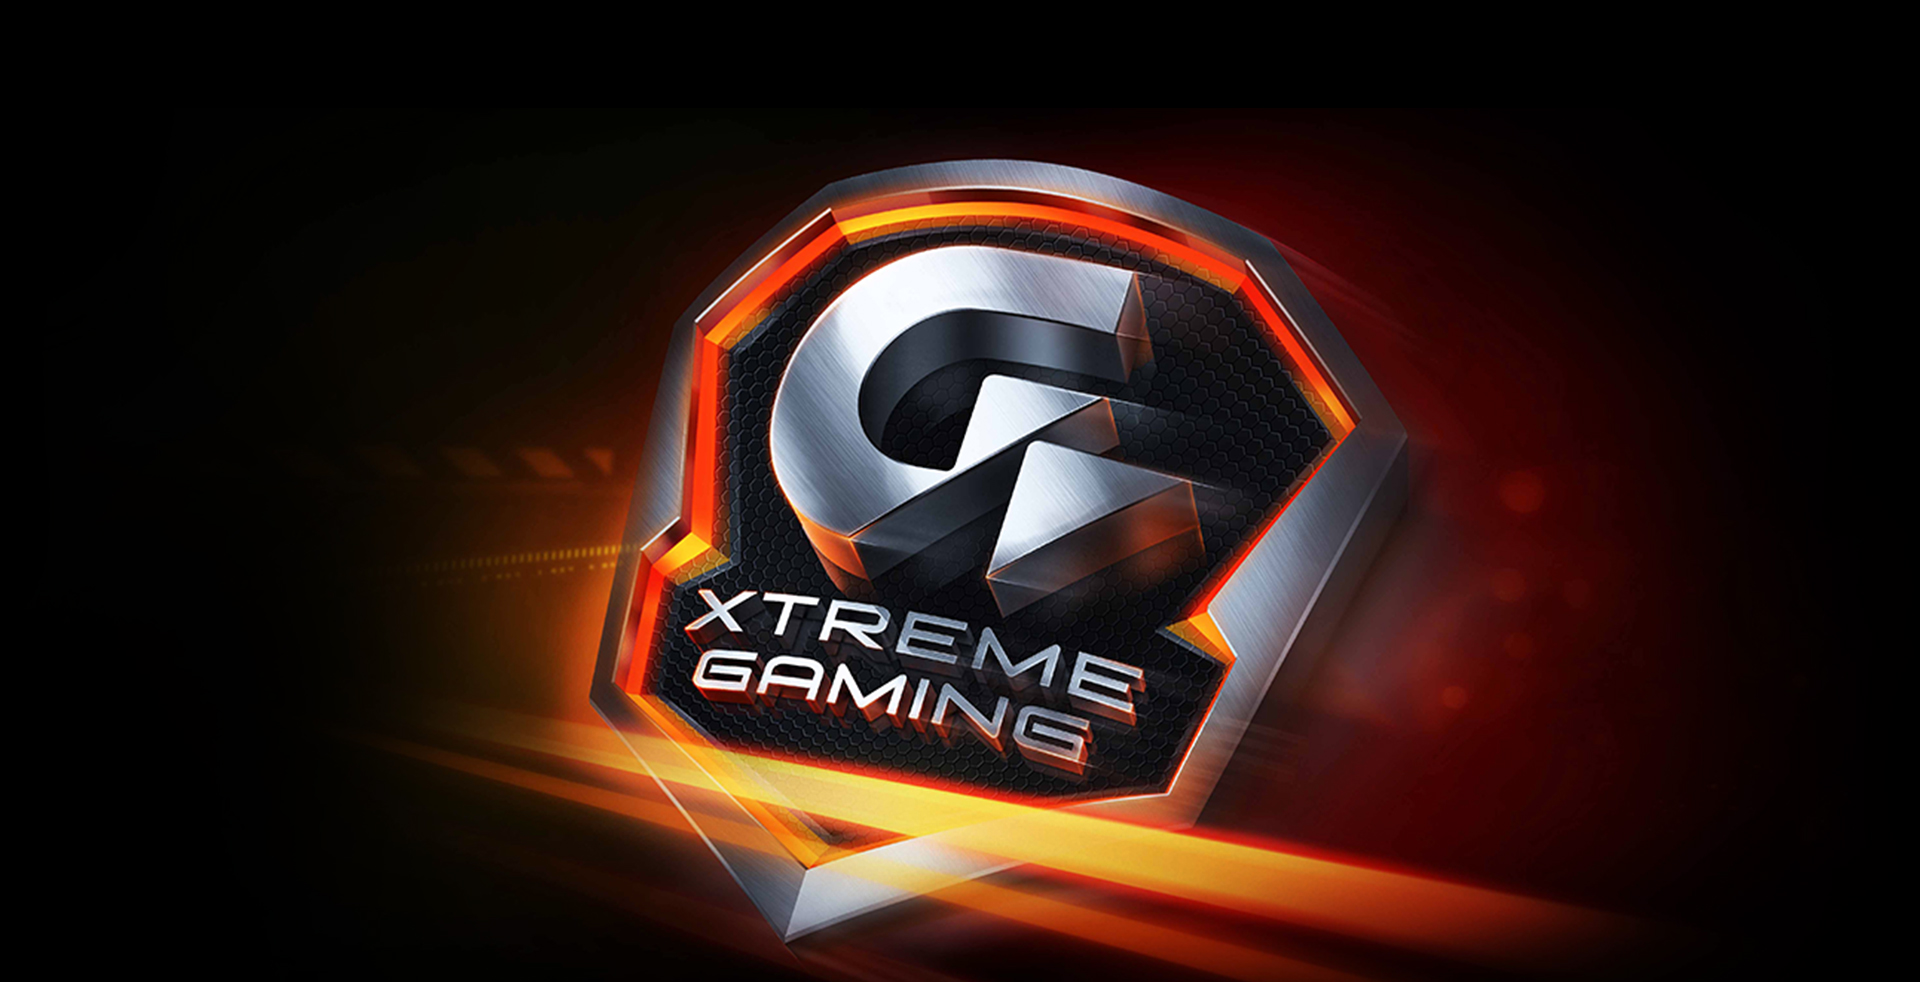 Fascinating LED features! - GIGABYTE XTREME GAMING 